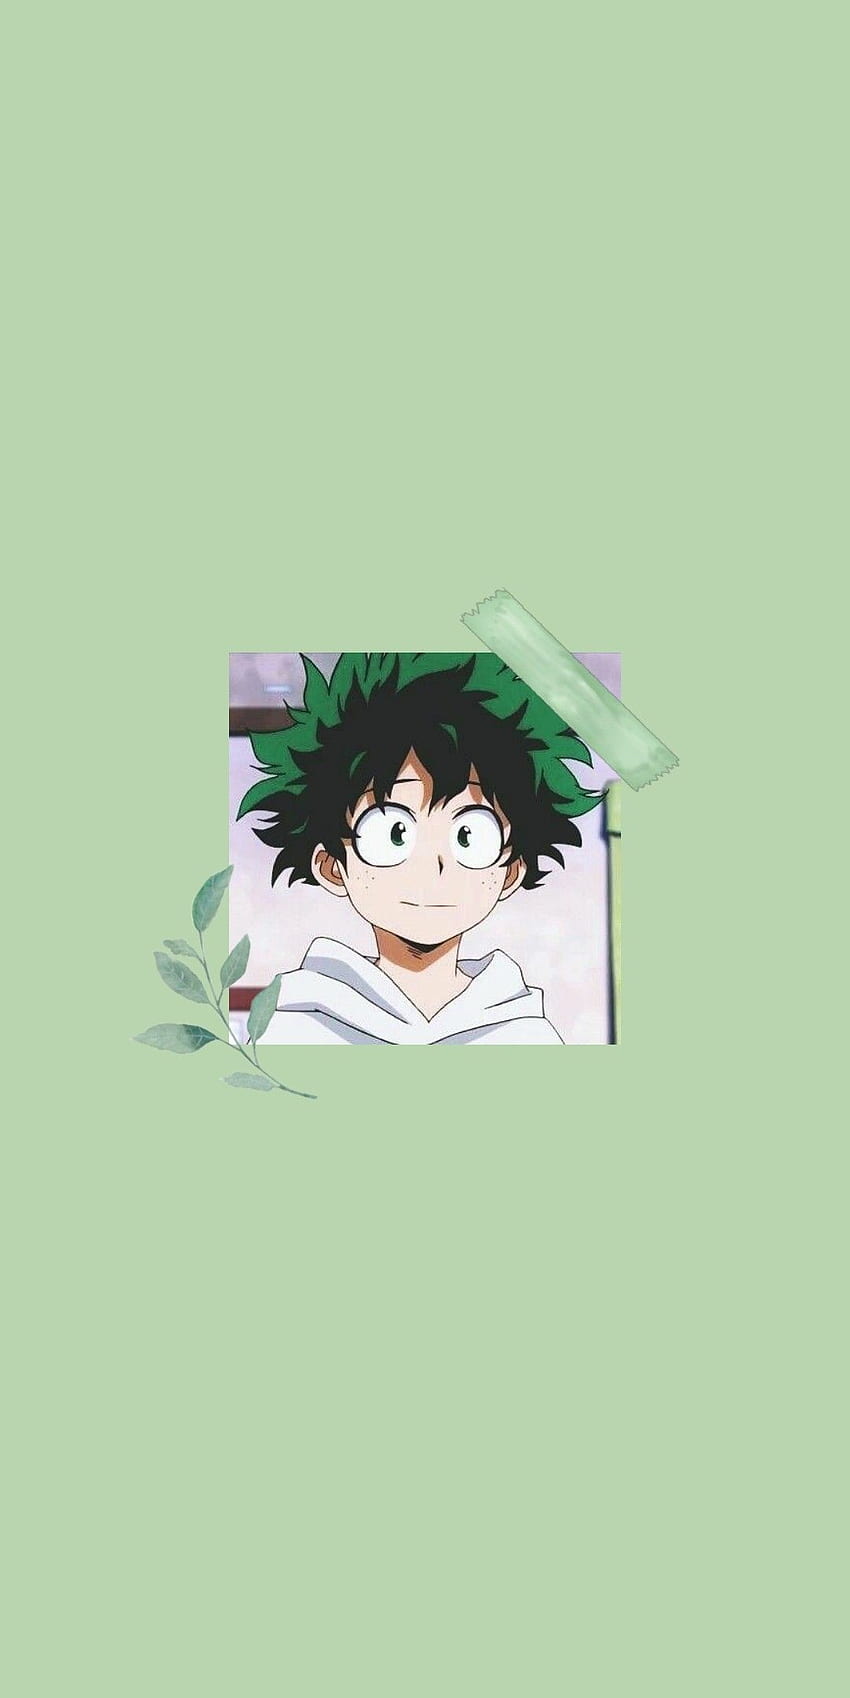 green anime - Online Discount Shop for Electronics, Apparel, Toys, Books, Games, Computers, Shoes, Jewelry, Watches, Baby Products, Sports & Outdoors, Office Products, Bed & Bath, Furniture, Tools, Hardware, Automotive Parts, Green Anime Aesthetic HD phone wallpaper